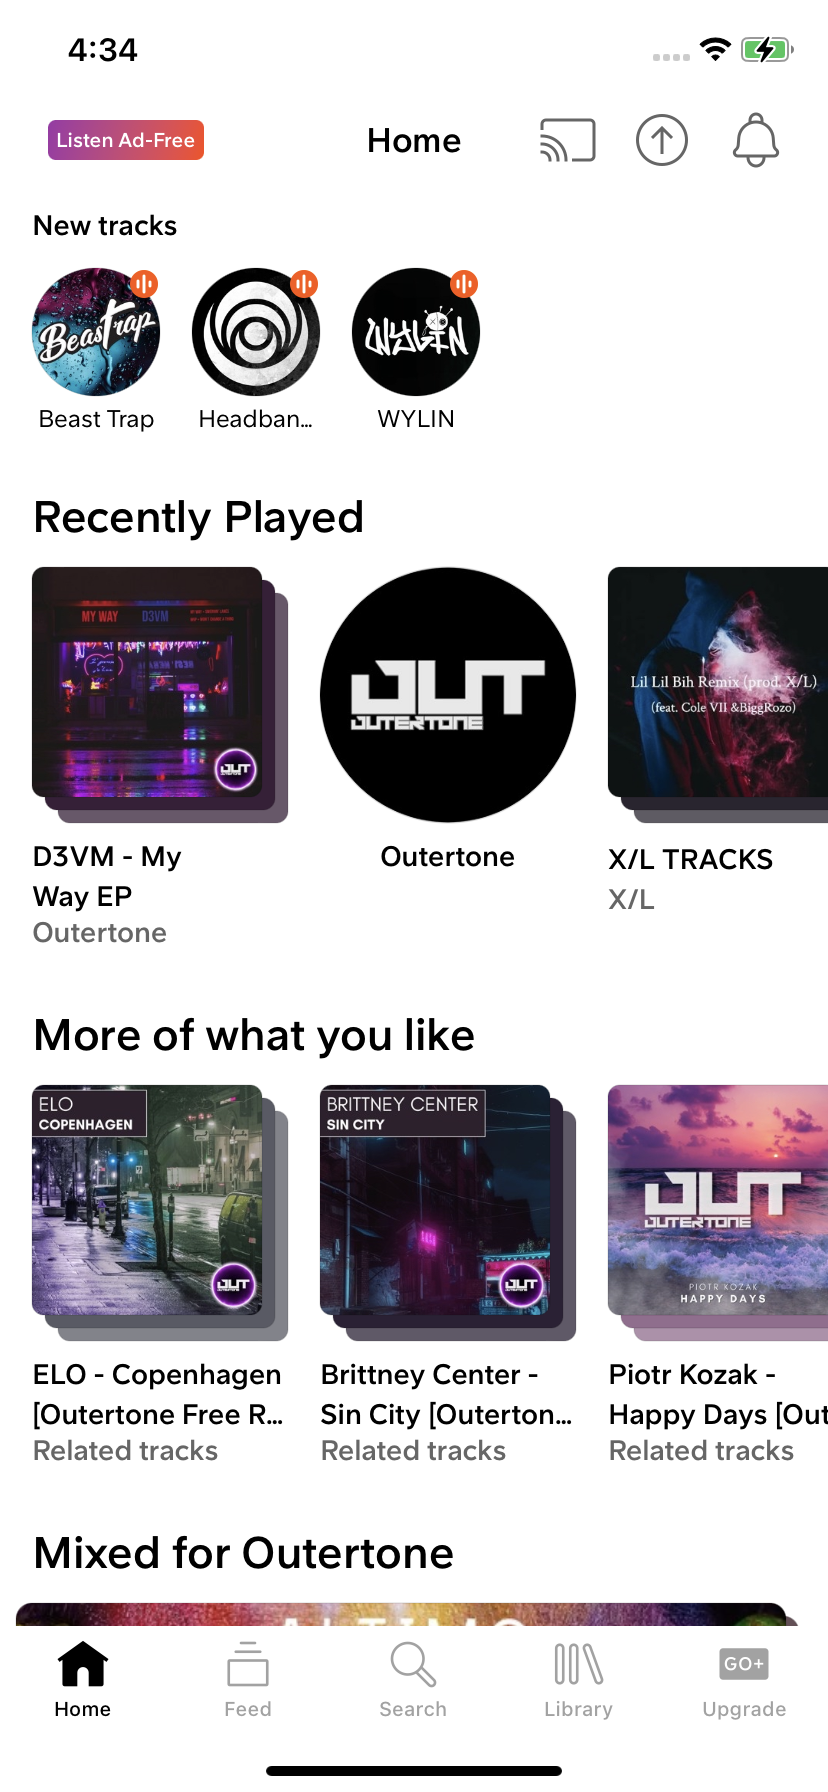 Stream ditto music  Listen to songs, albums, playlists for free on  SoundCloud